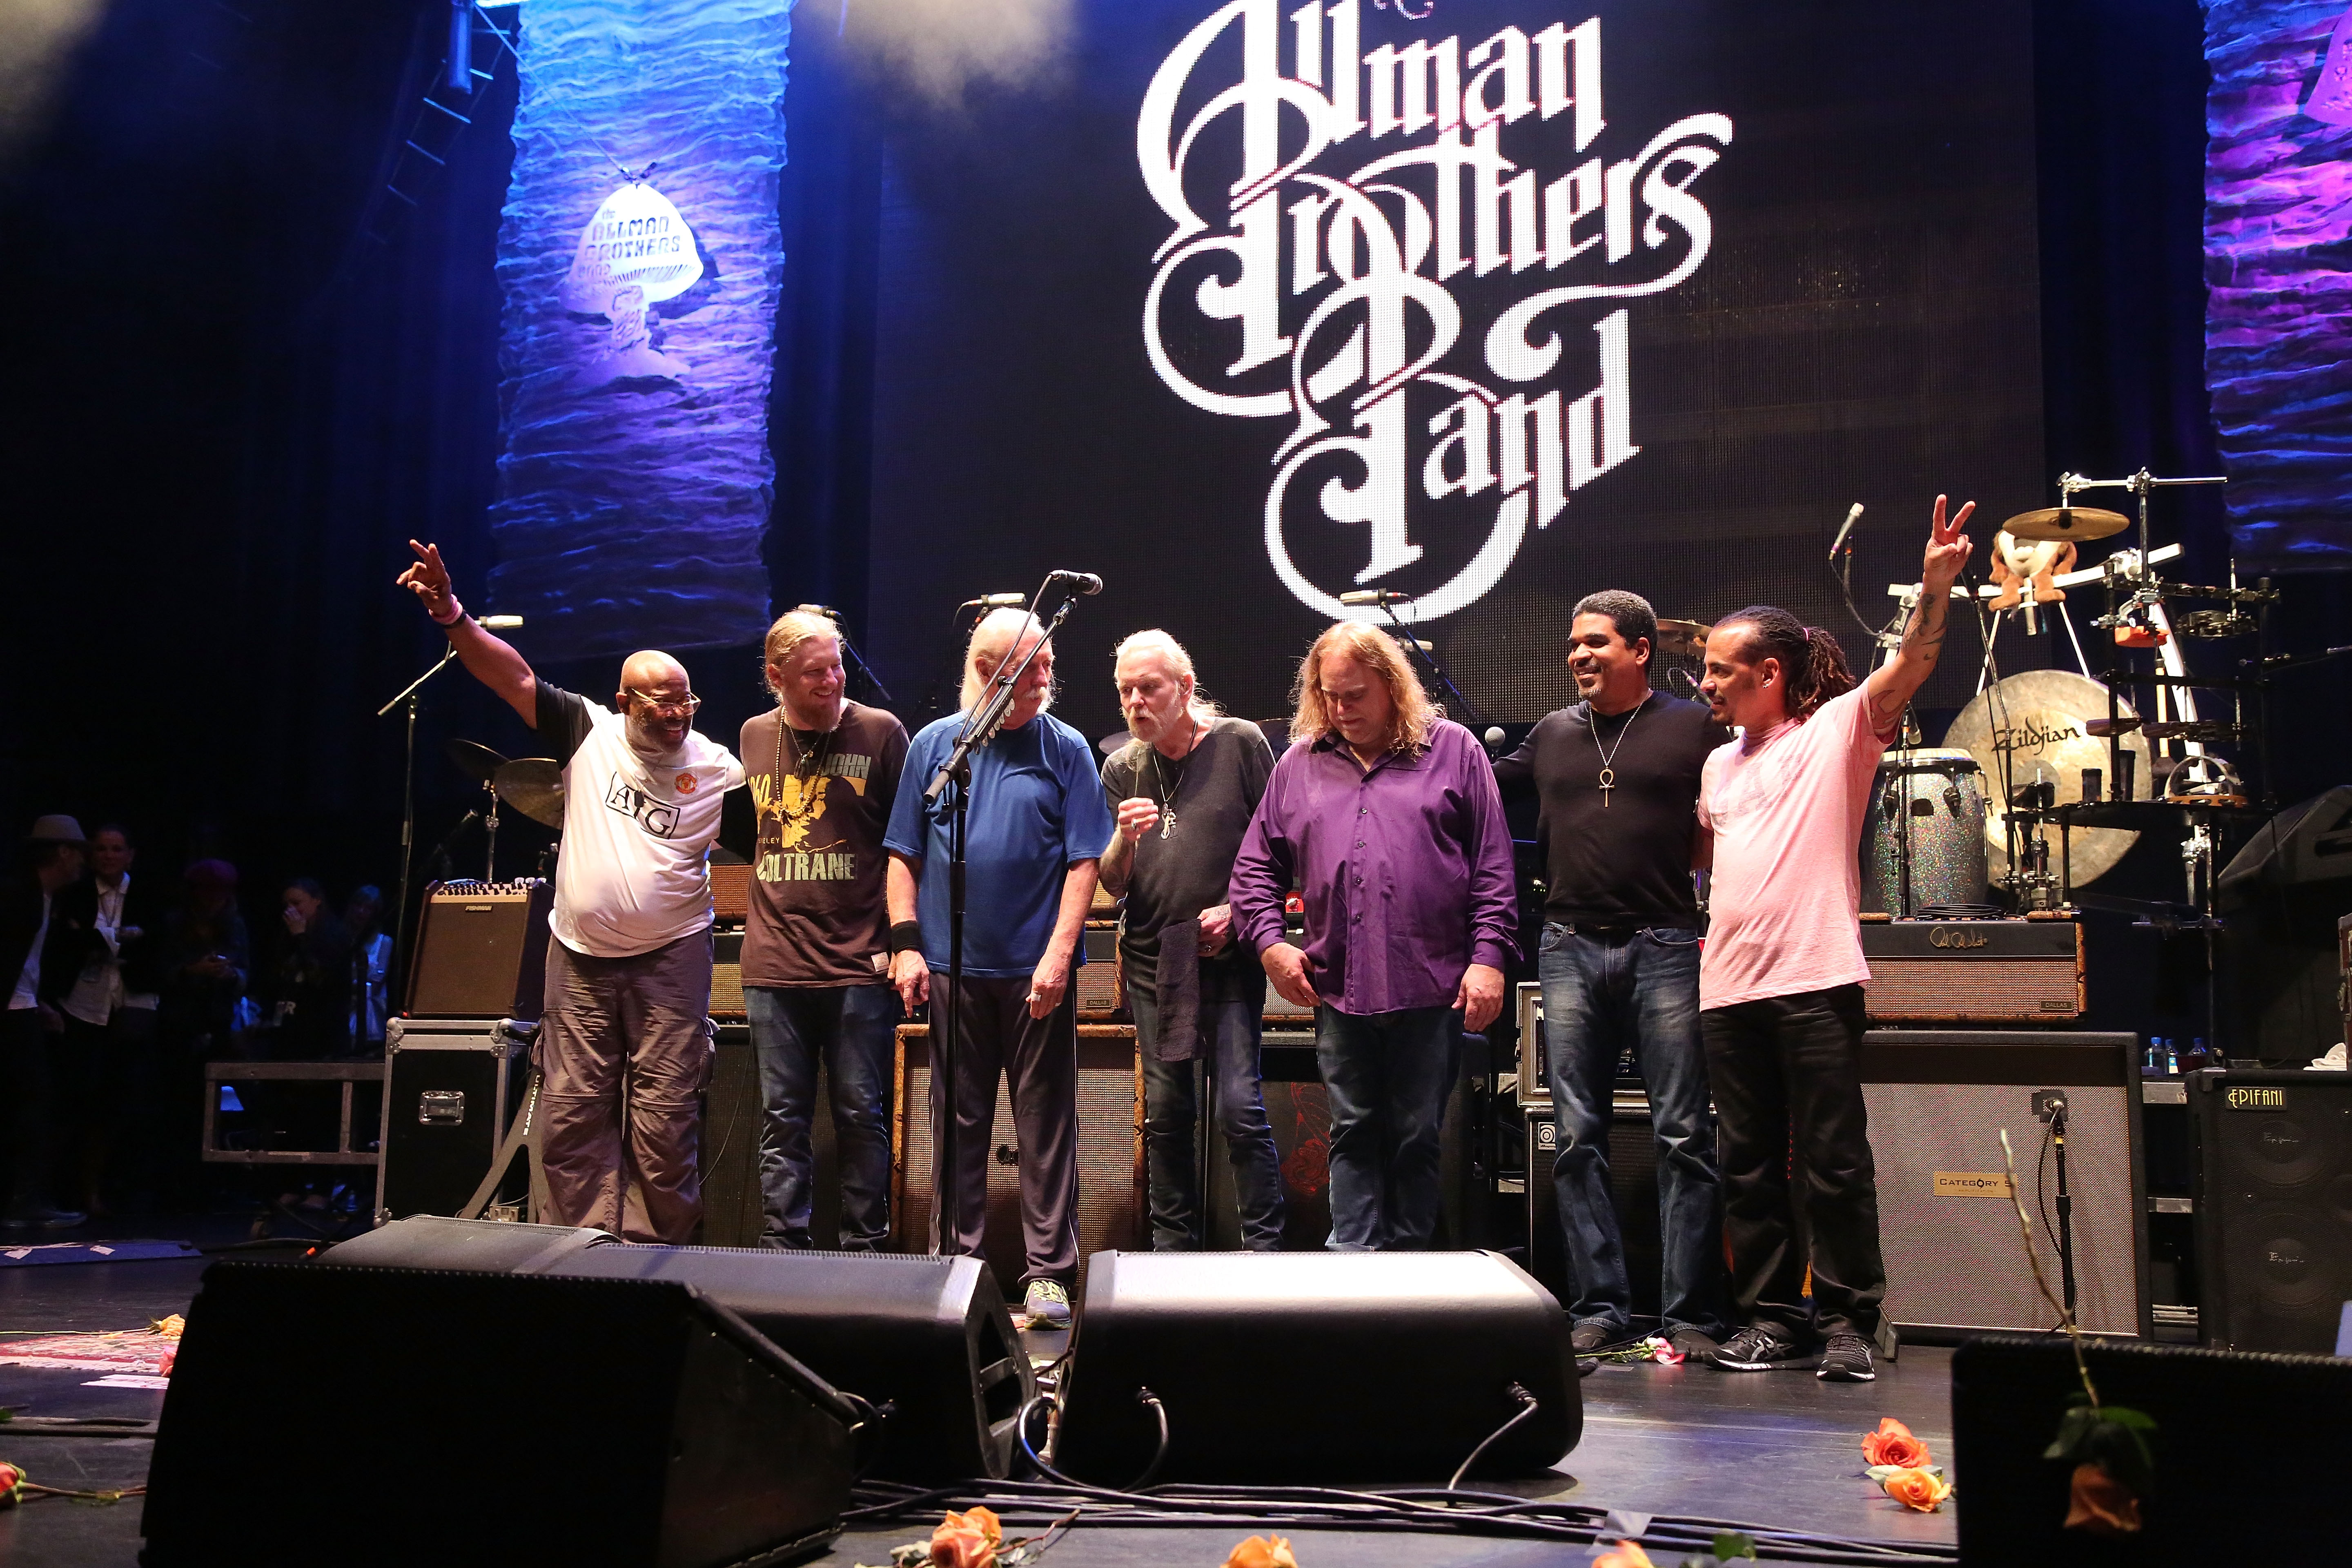 Allman Brothers Band final show